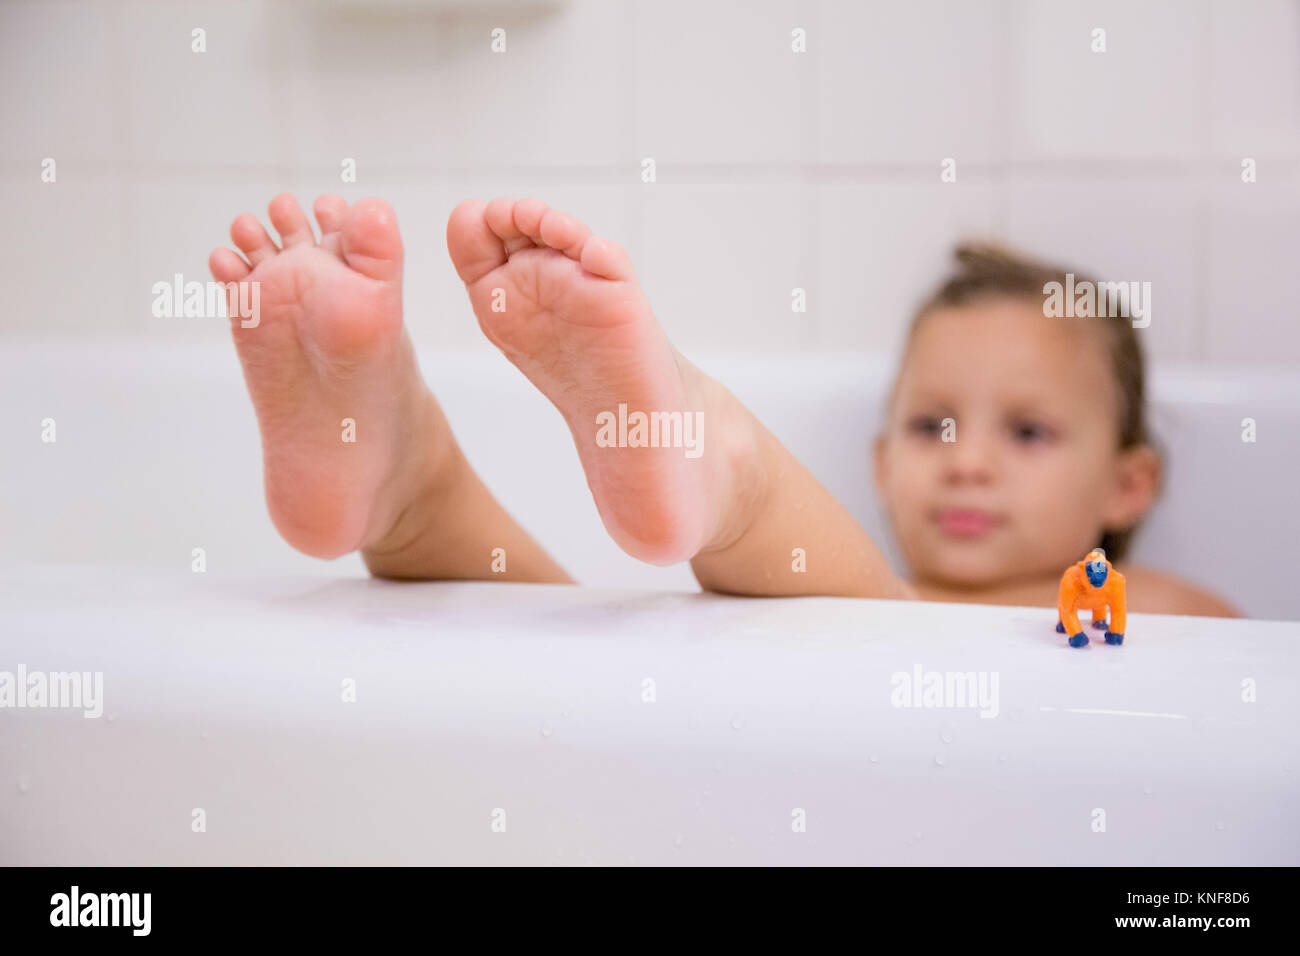 Girl with feet up relaxing in bath Stock Photo